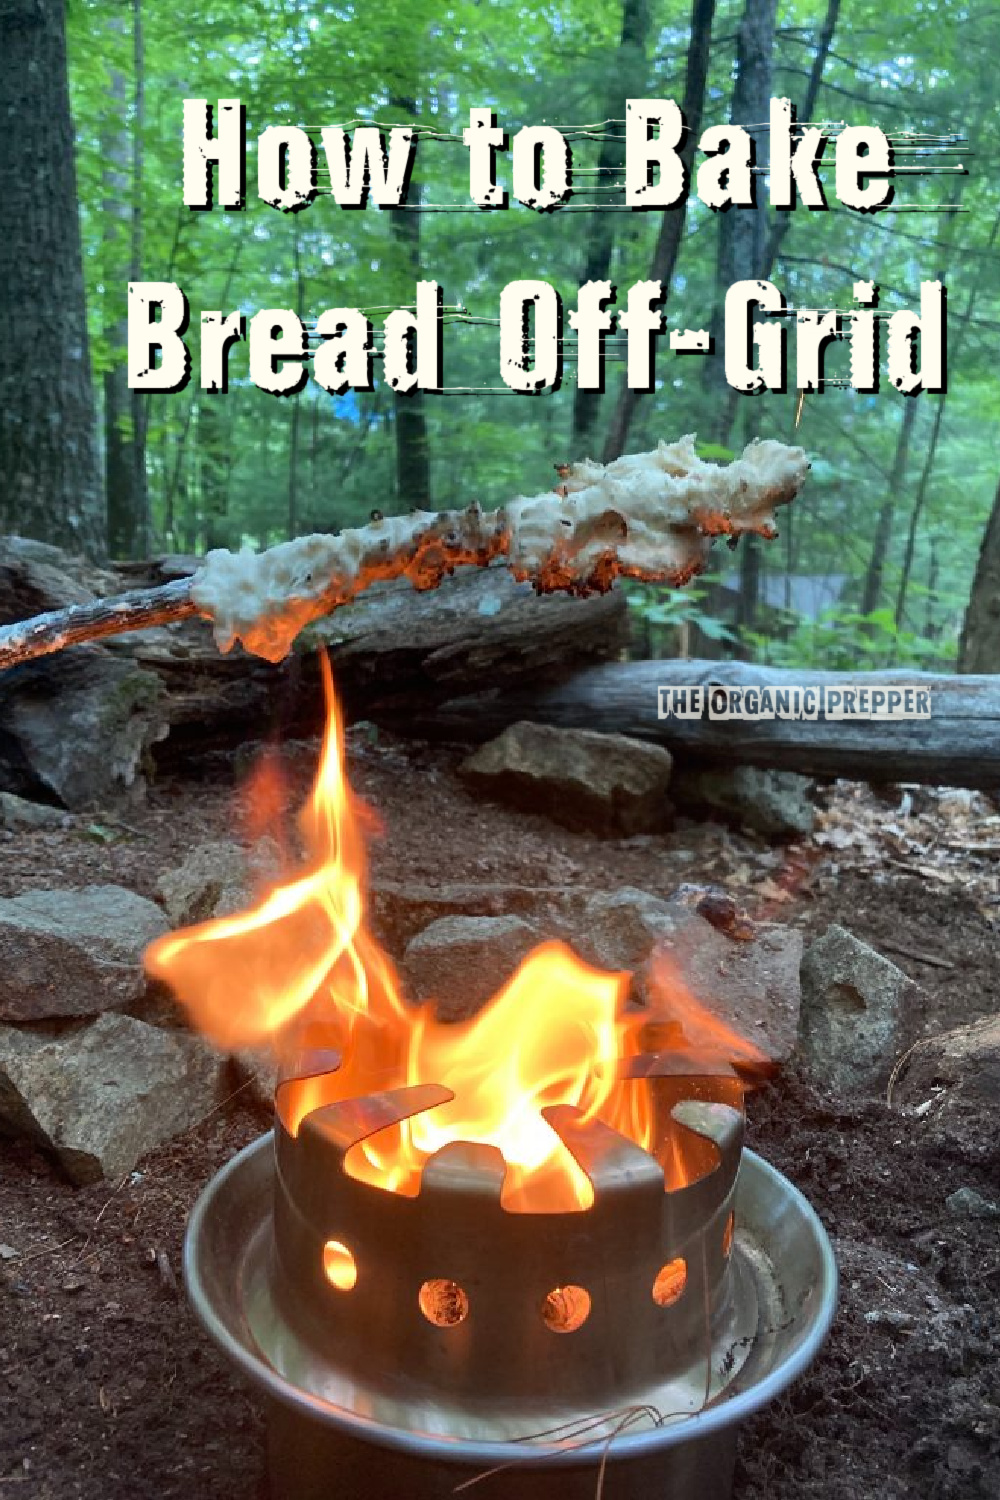 How to Bake Bread Off-Grid